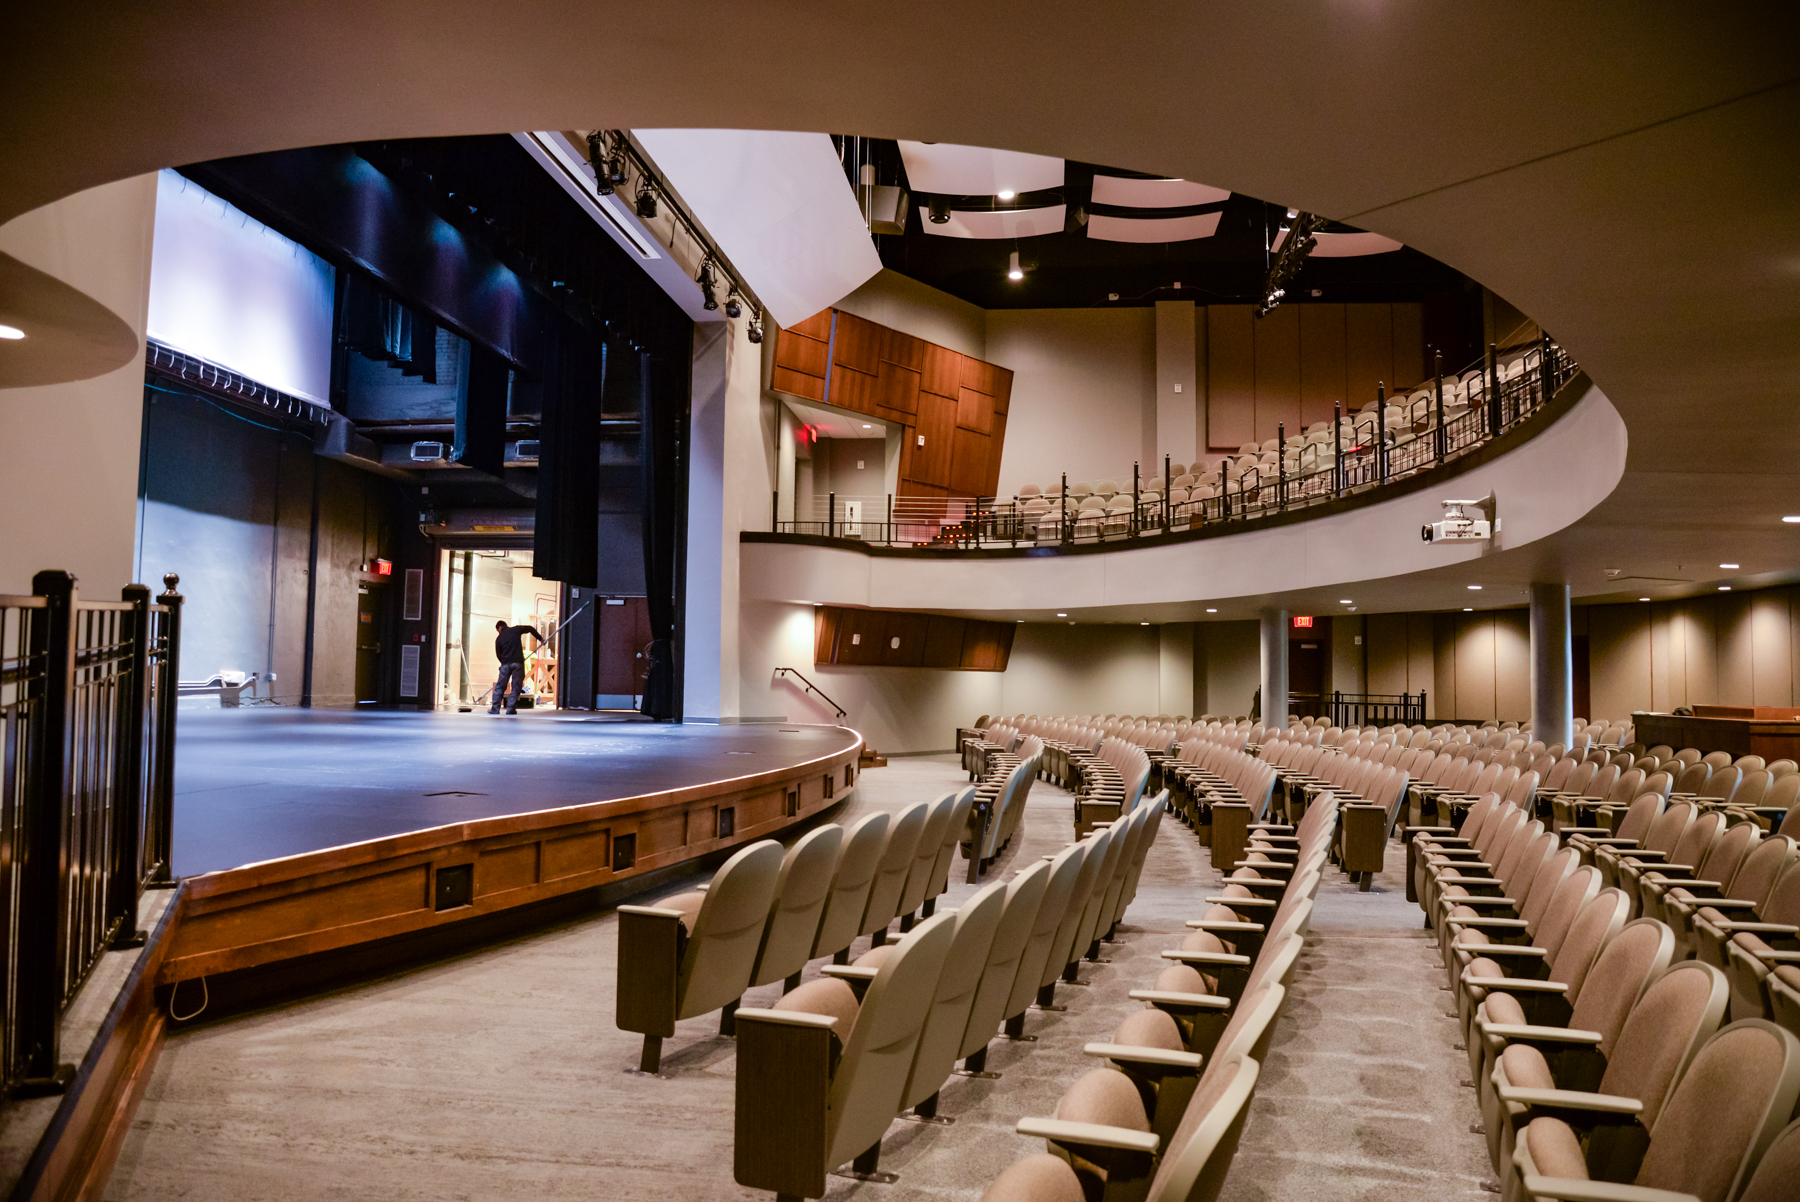 Interior view of the auditorium and stage of the Performing Arts Center.